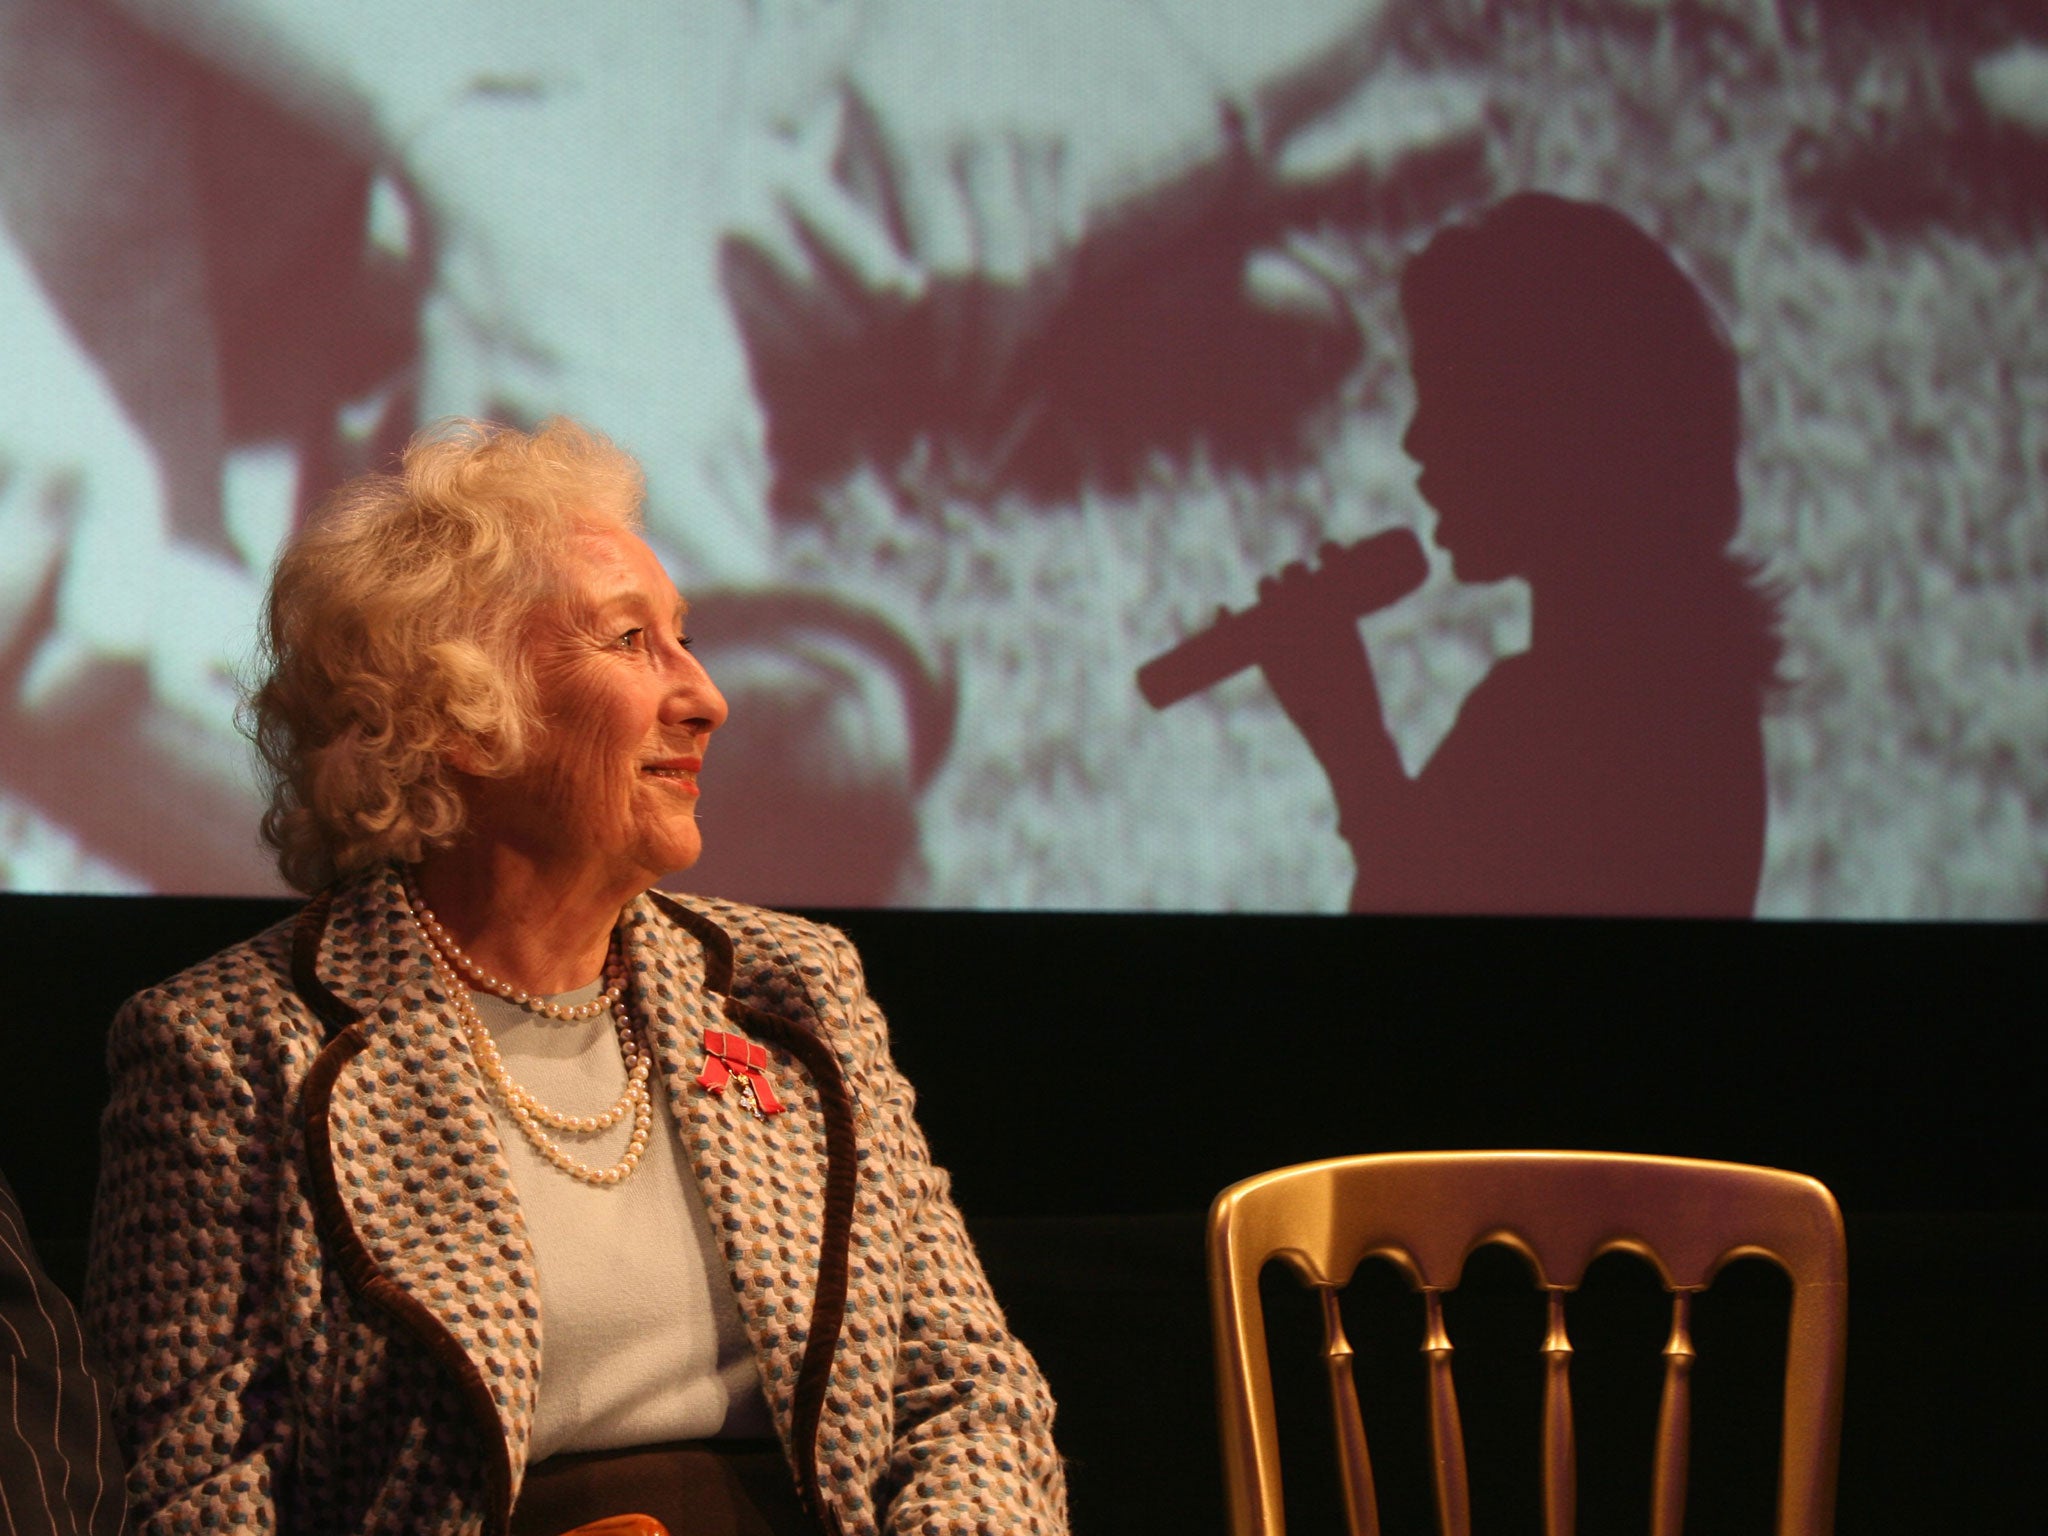 Dame Vera at 90 became the oldest artist to top the UK charts in 2009 